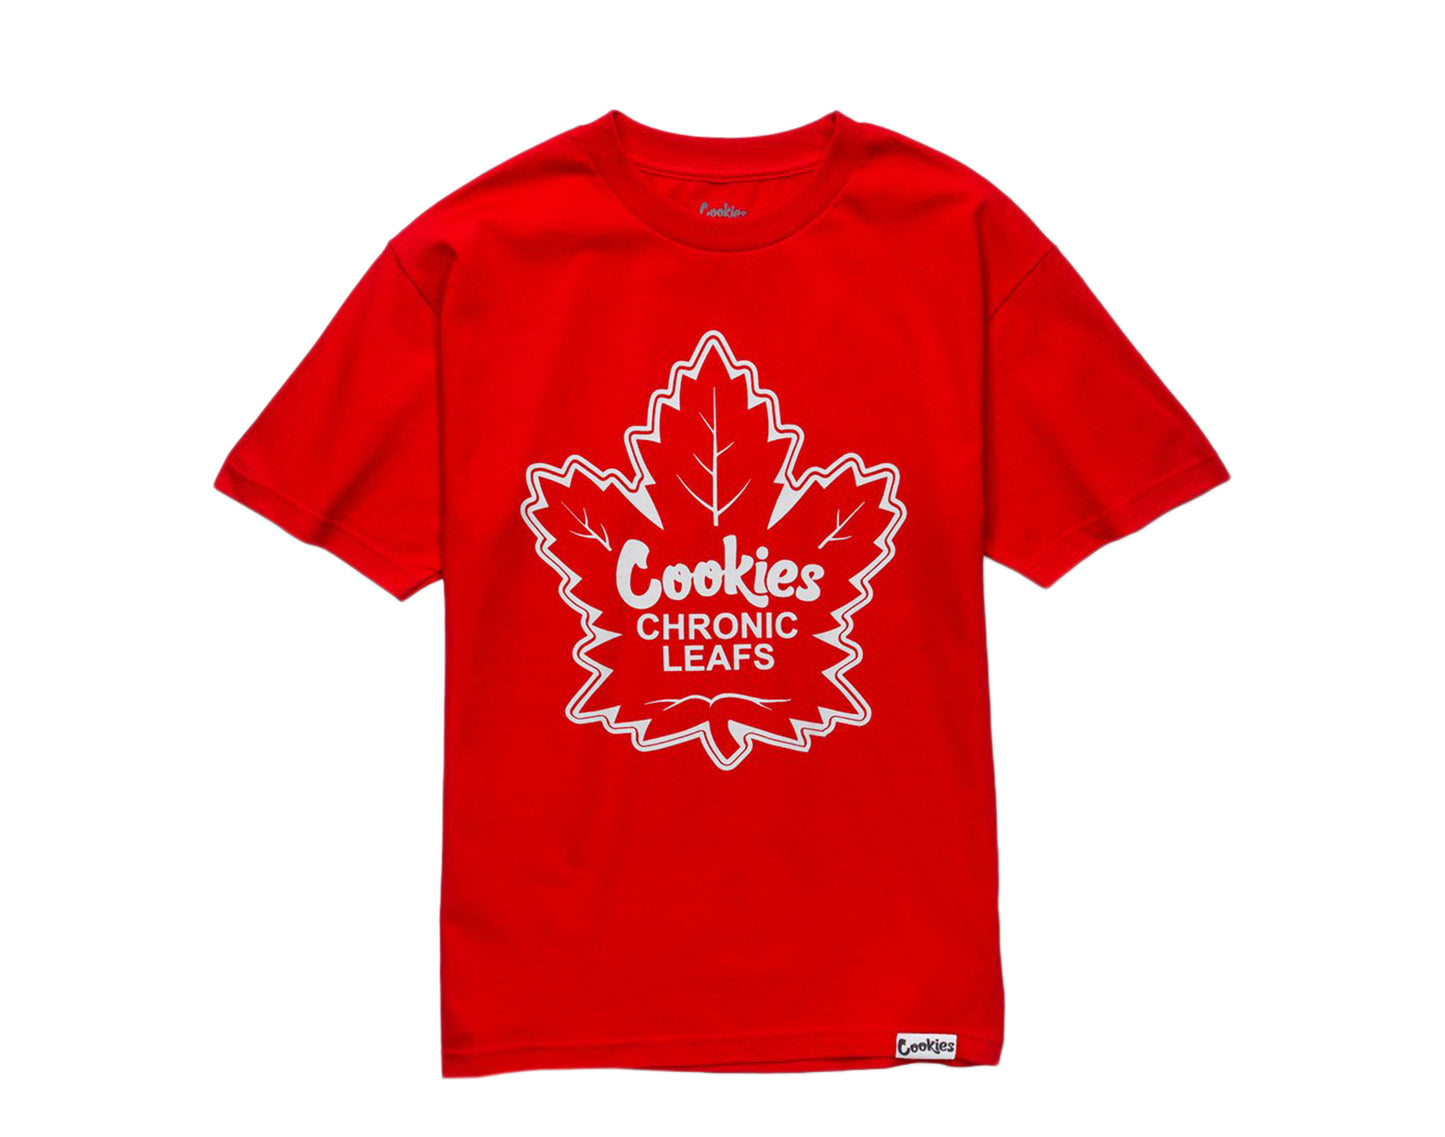 Cookies Chronic Leafs Red Men's Tee Shirt 1545T4189-RED